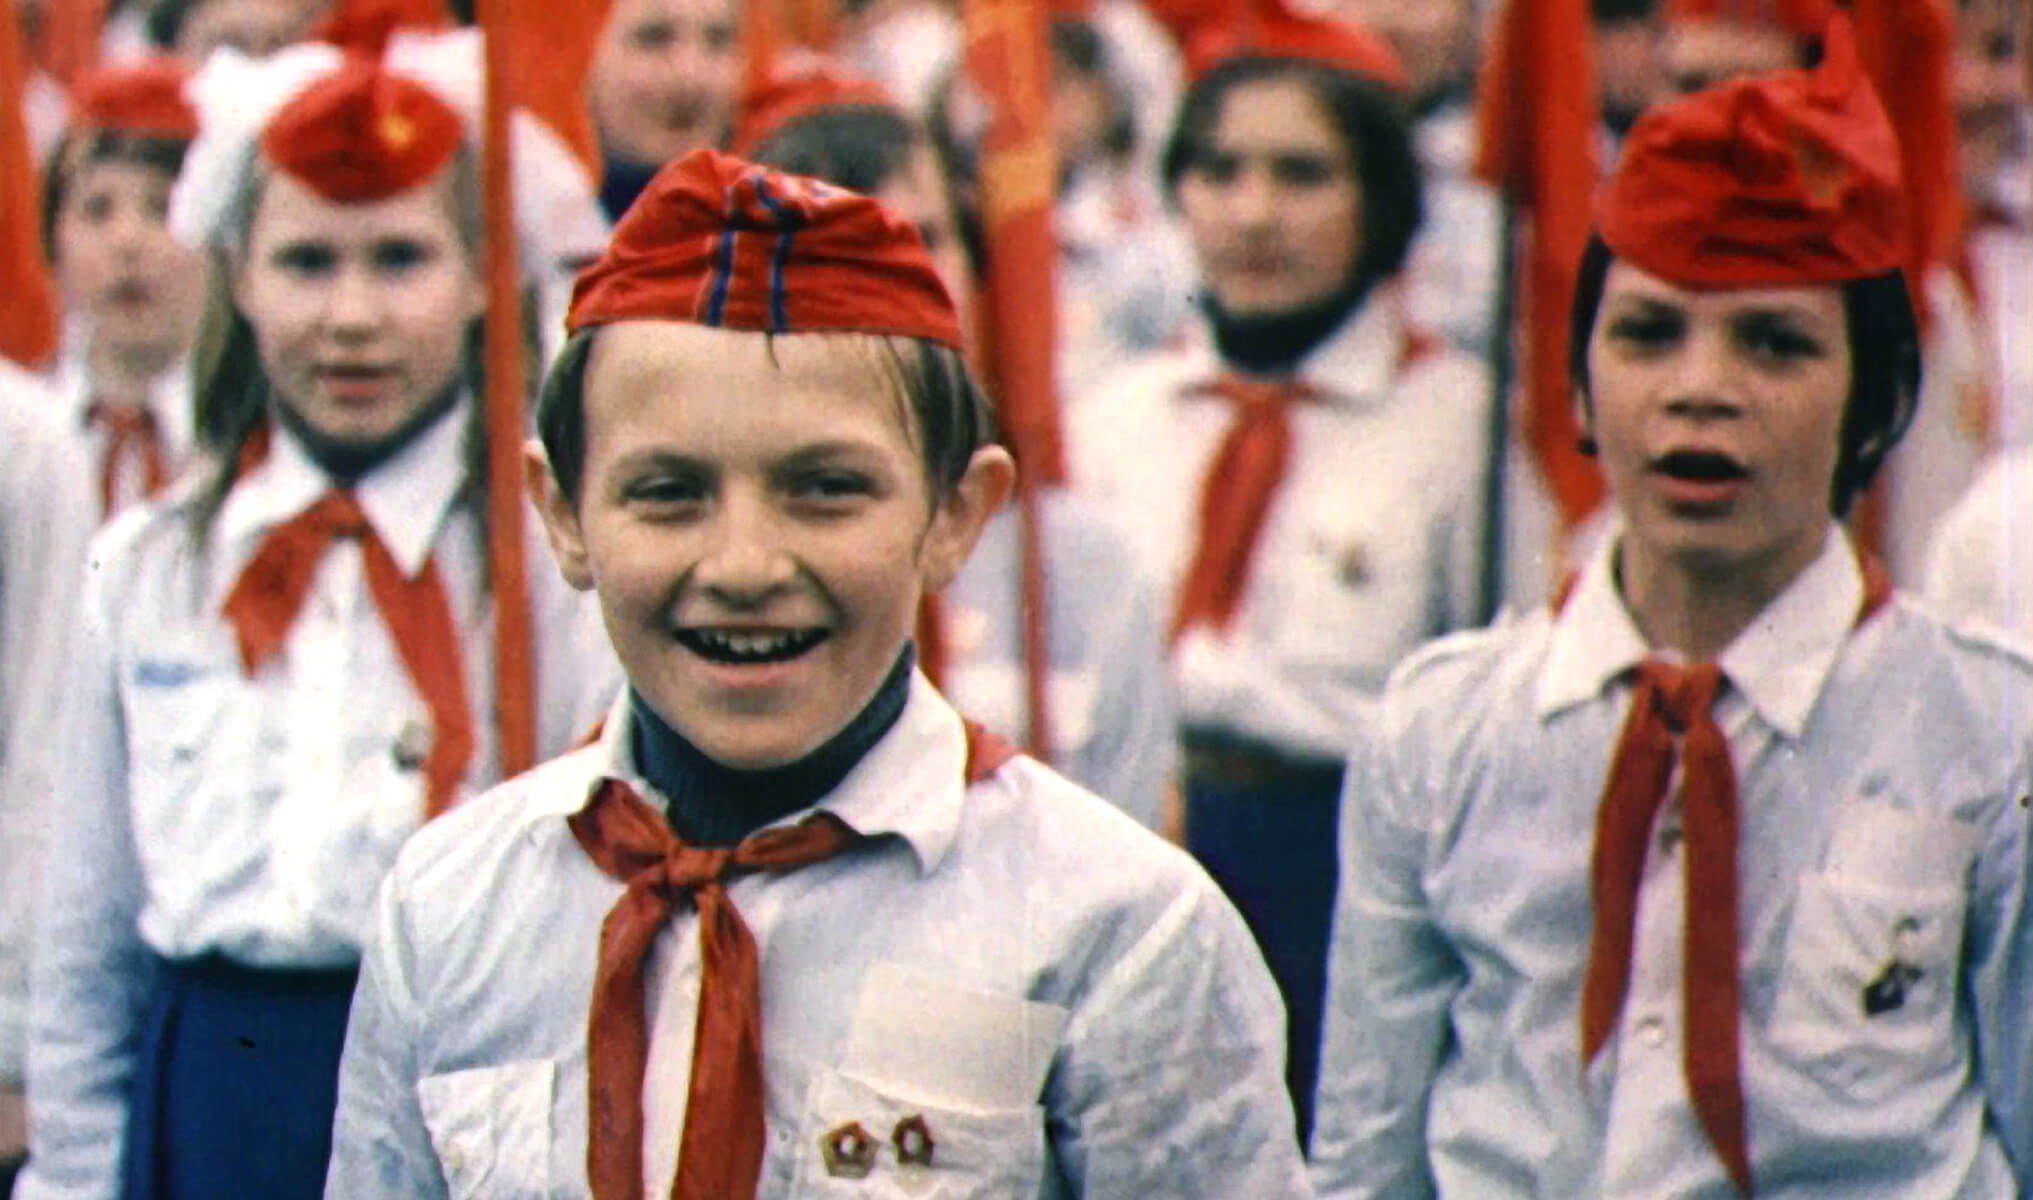 Still from My Perestroika. Rows of children wearing uniforms of white button down shirts, red ties, and red hats.